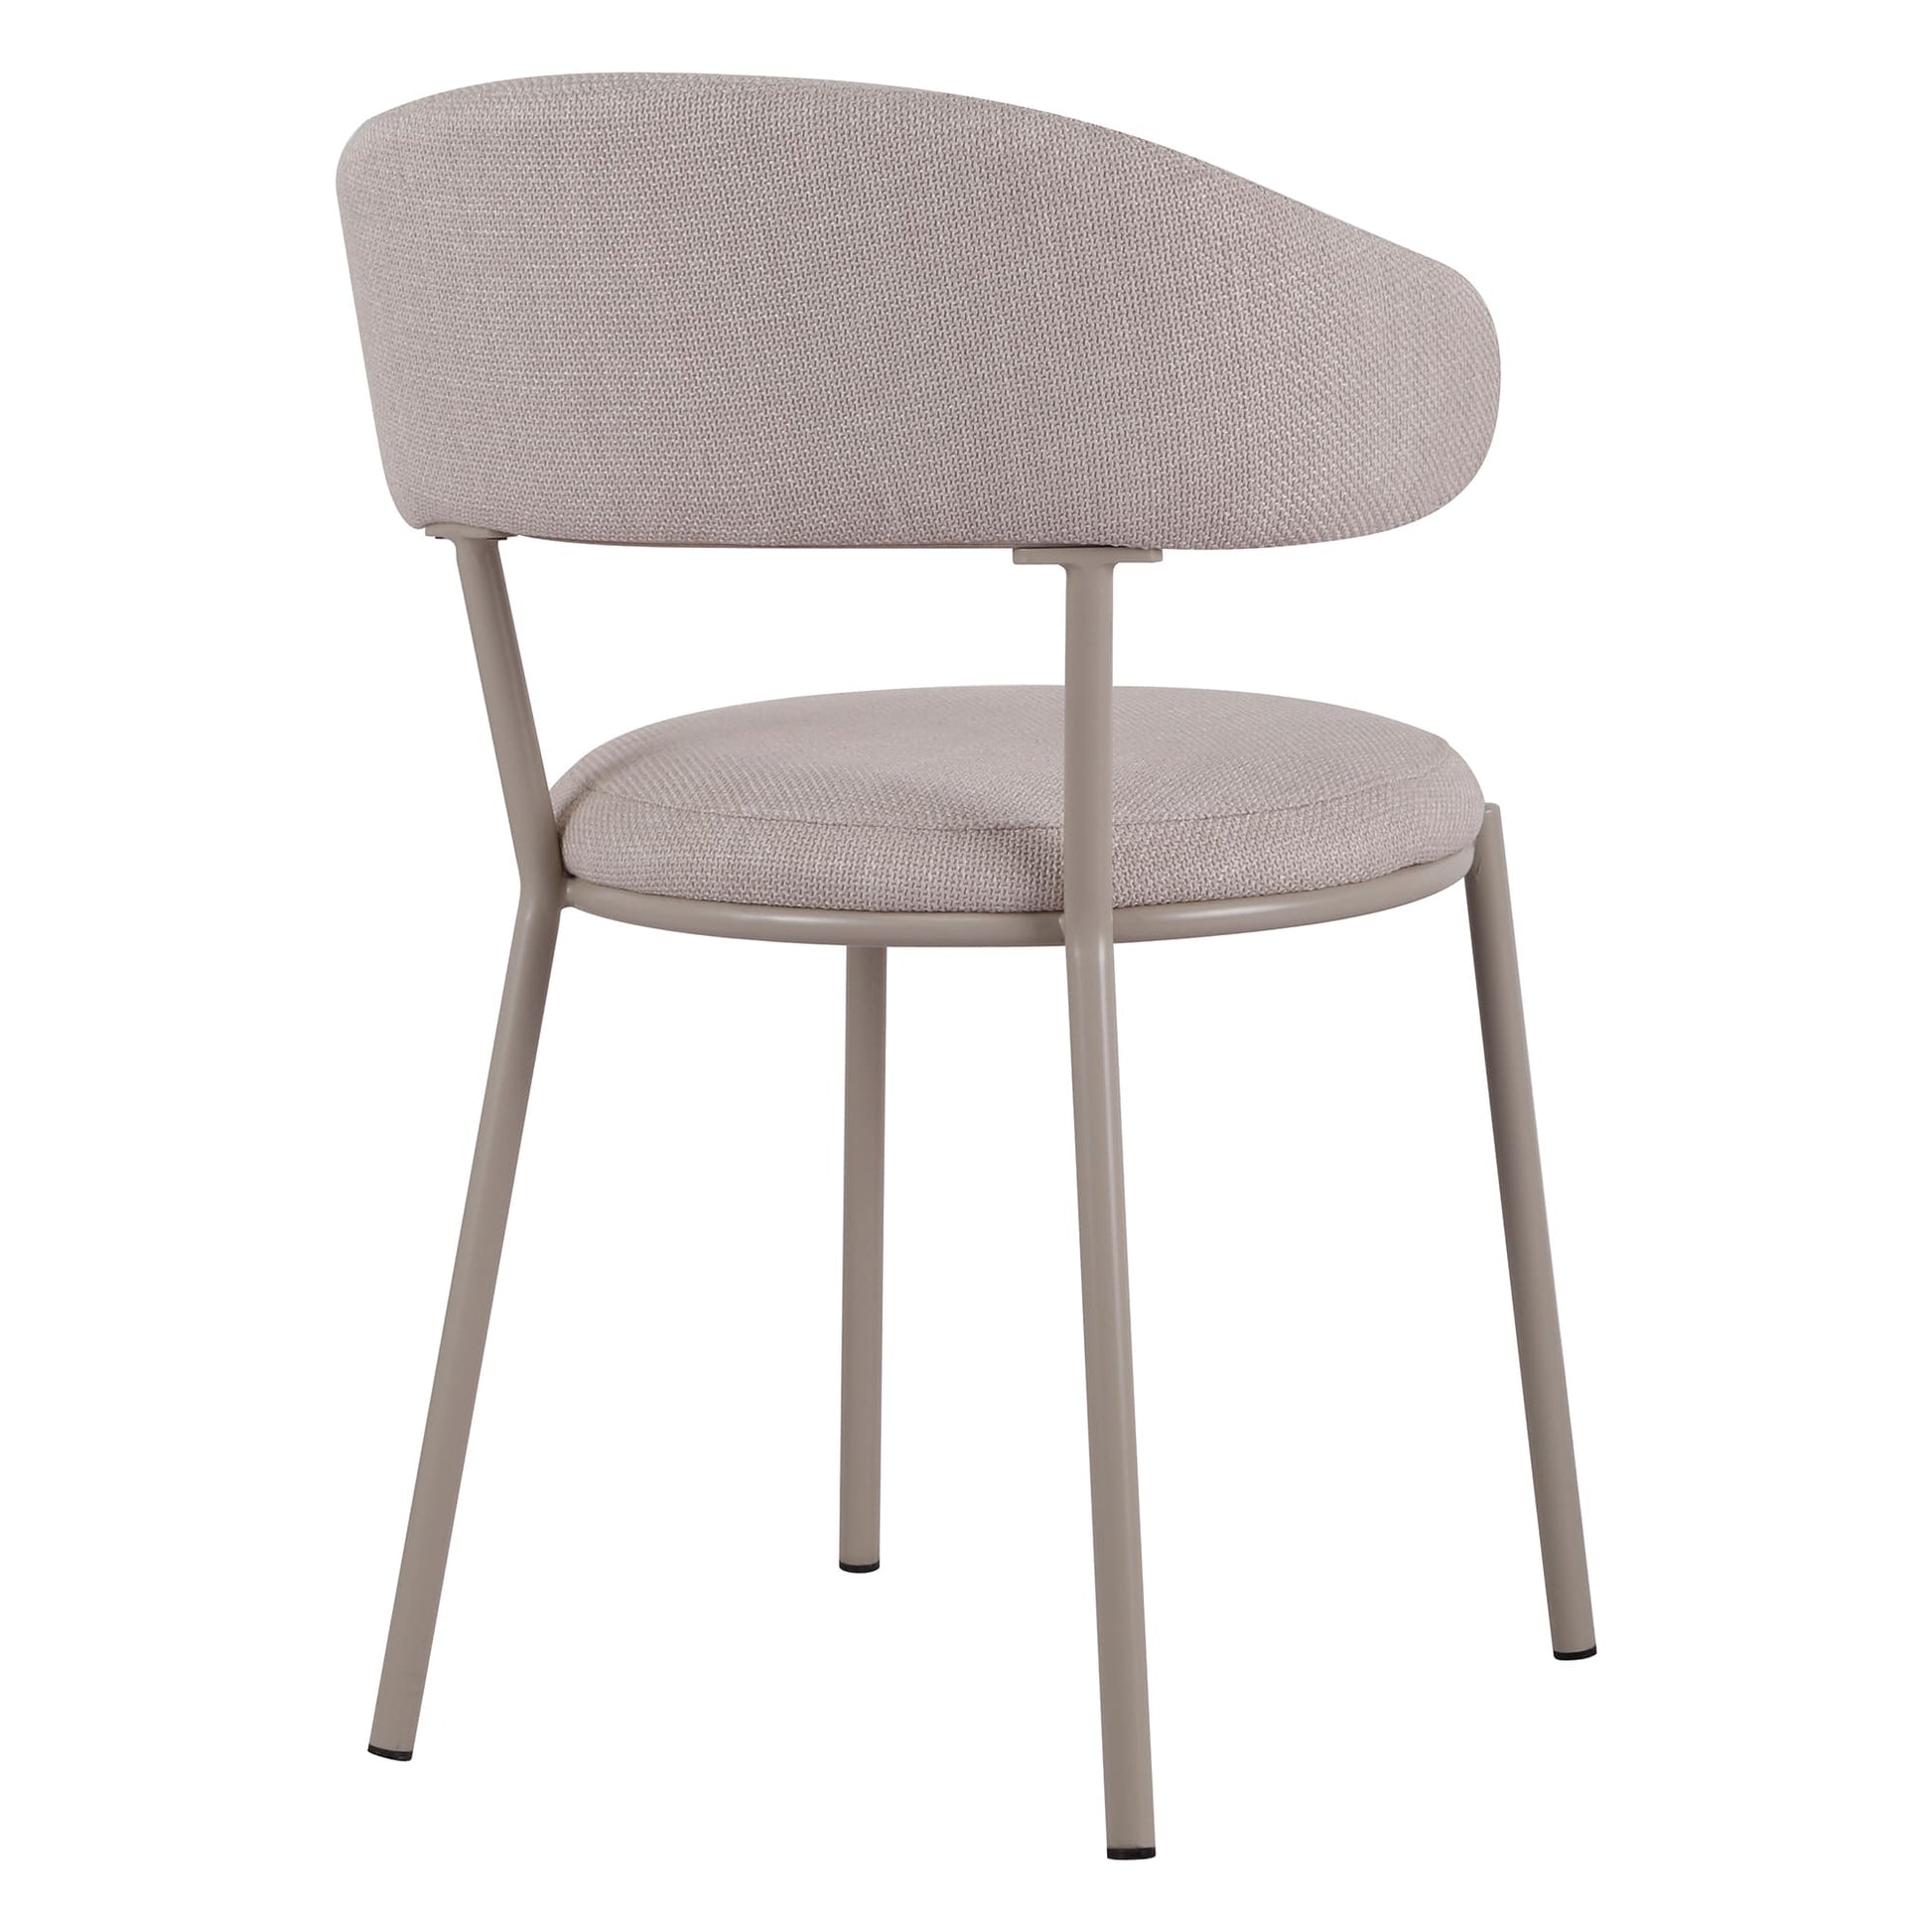 Arles | Shell Plum Fabric Modern Dining Chairs | Set Of 2 | Shell